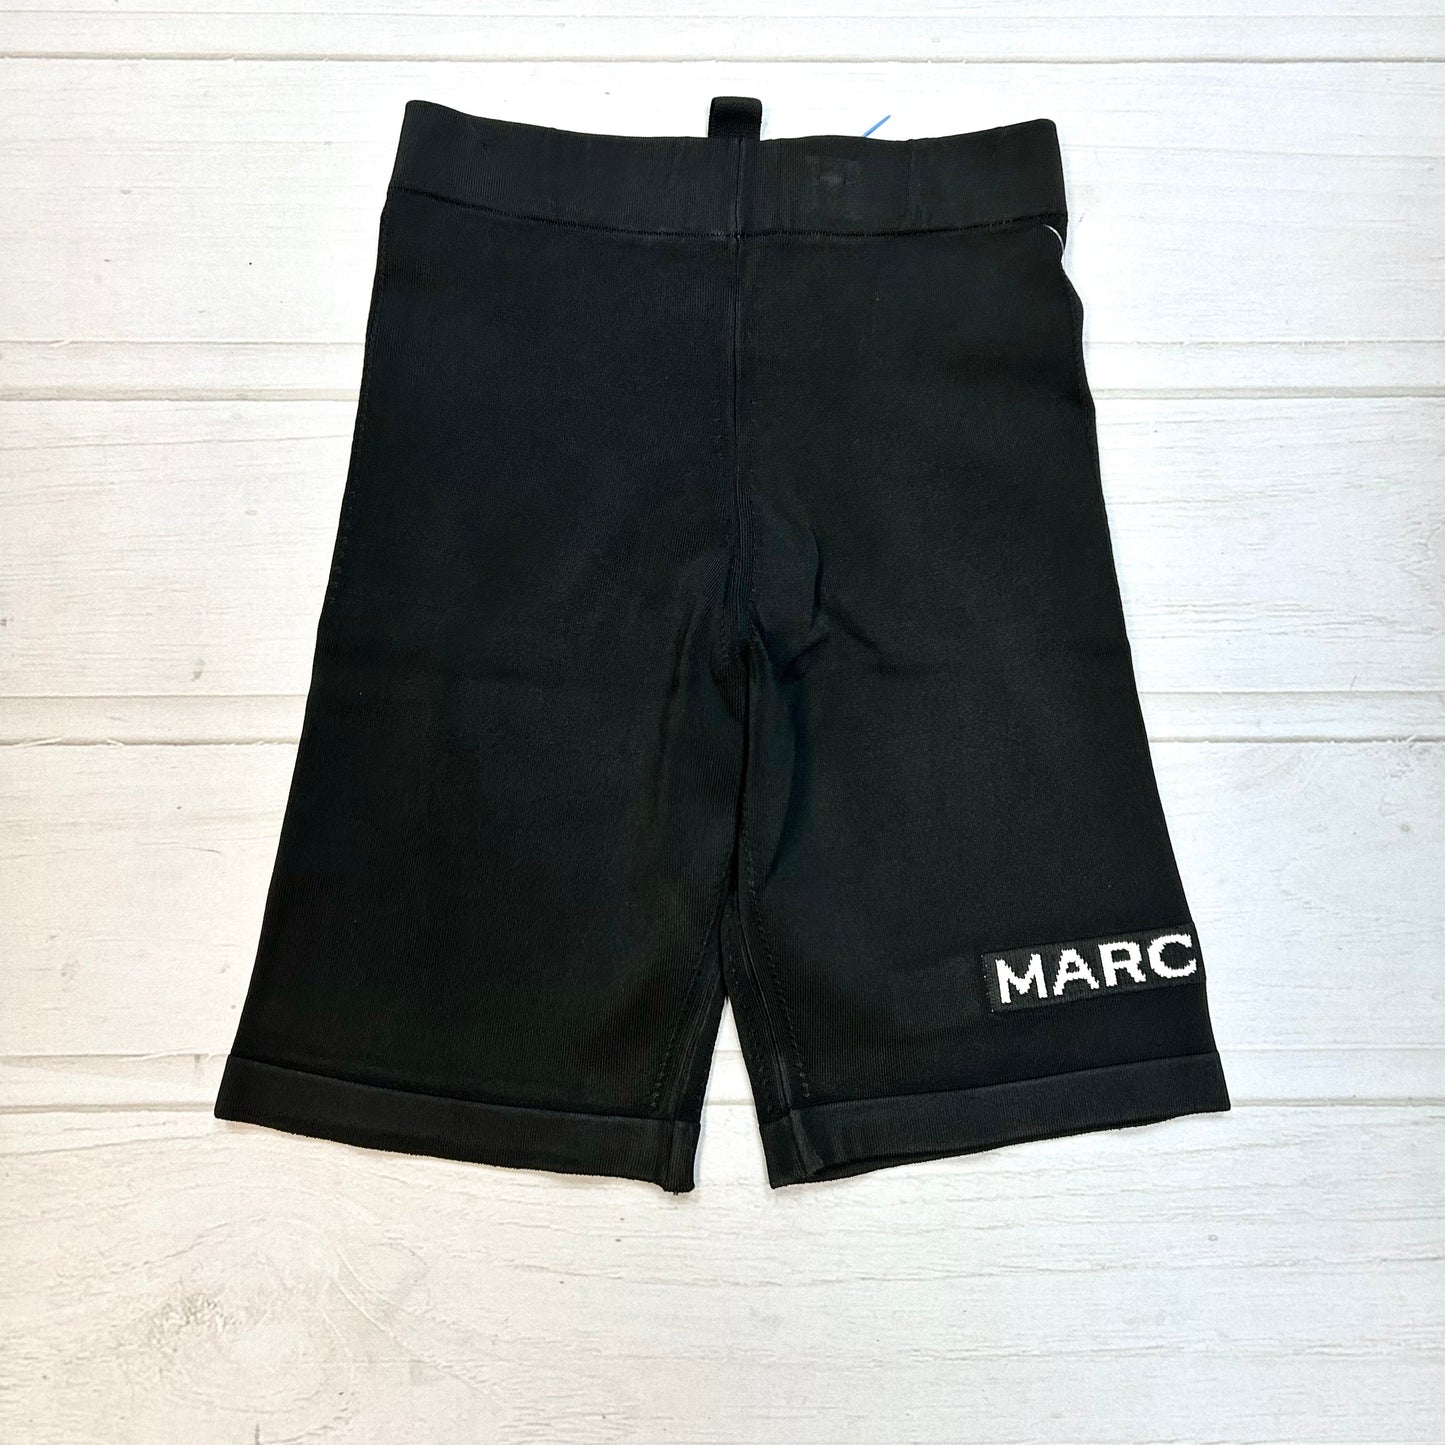 Shorts Designer By Marc Jacobs  Size: Xs